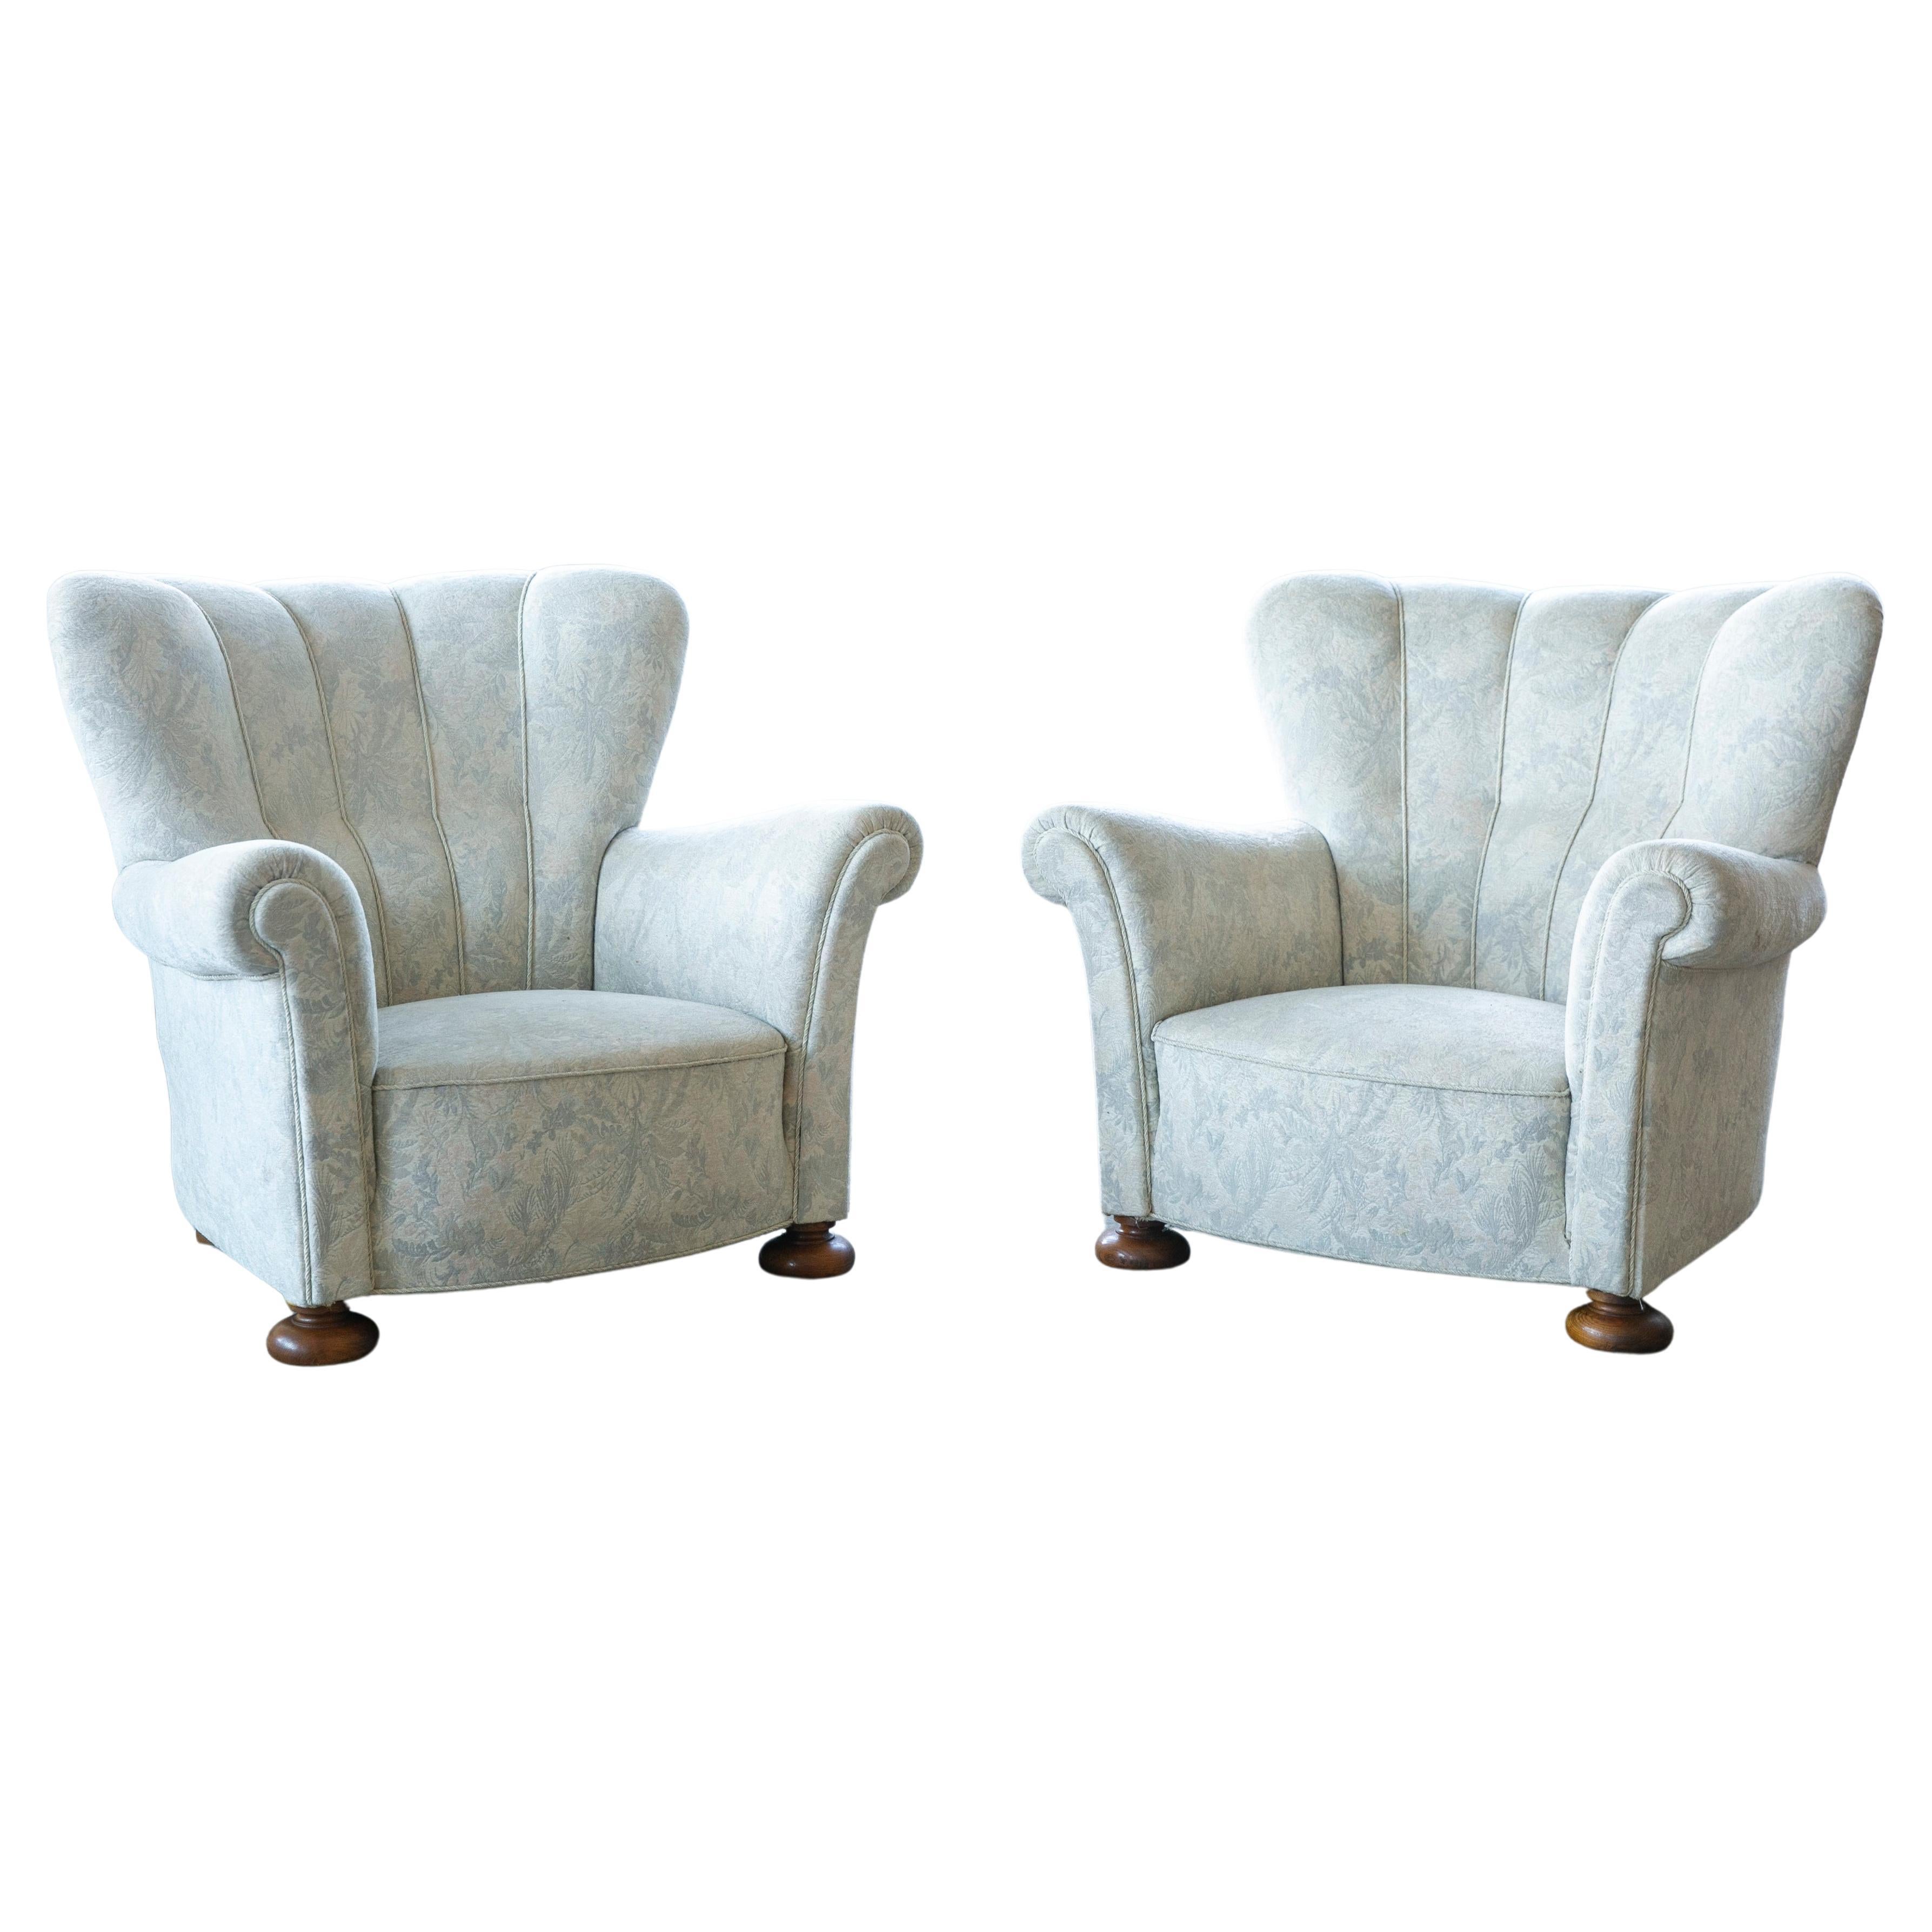 Pair of Danish 1940's Channelback Club Chairs Attributed to Fritz Hansen